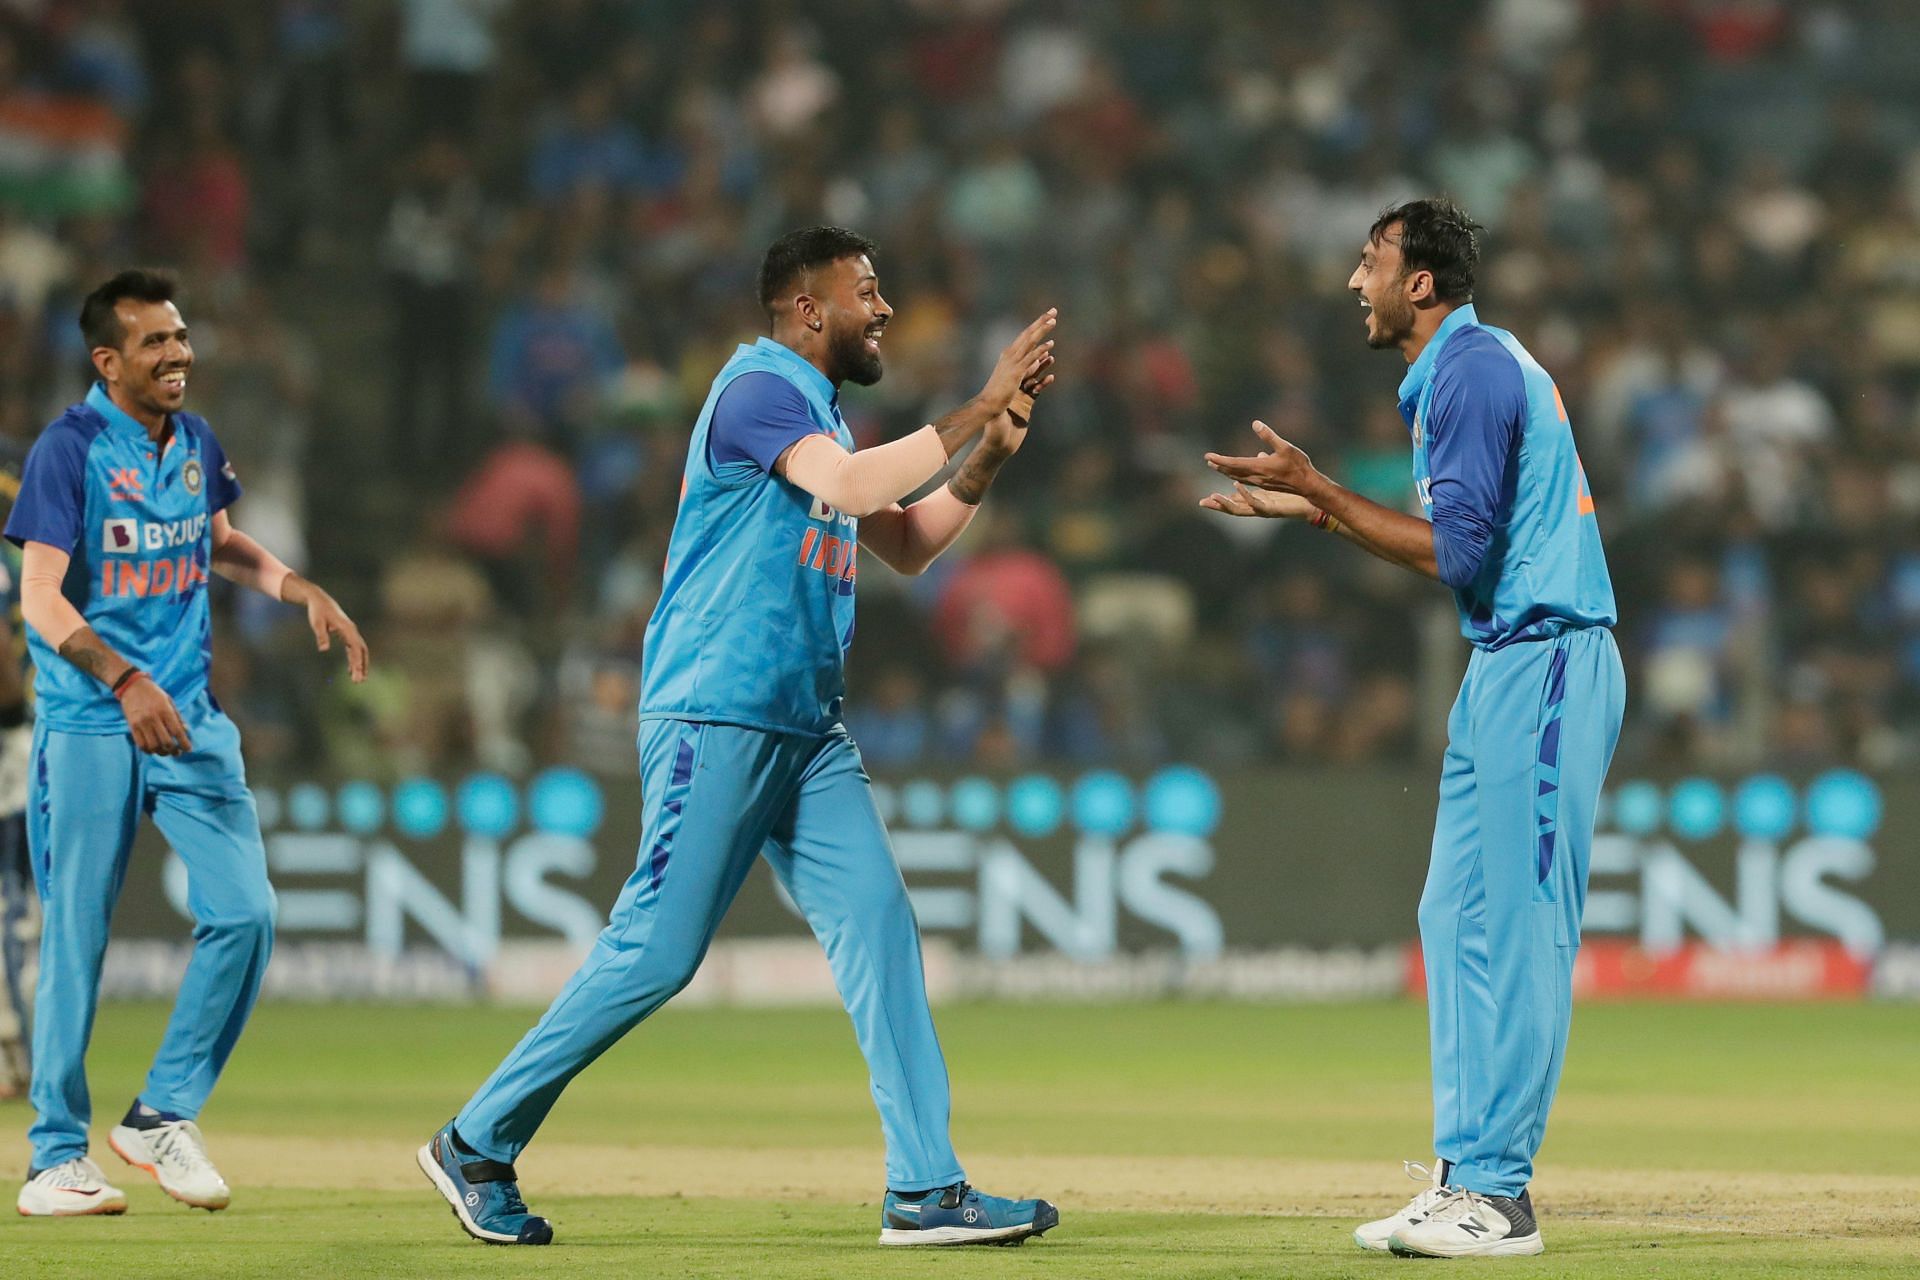 Team India fell short in the second T20I at the MCA Stadium in Pune